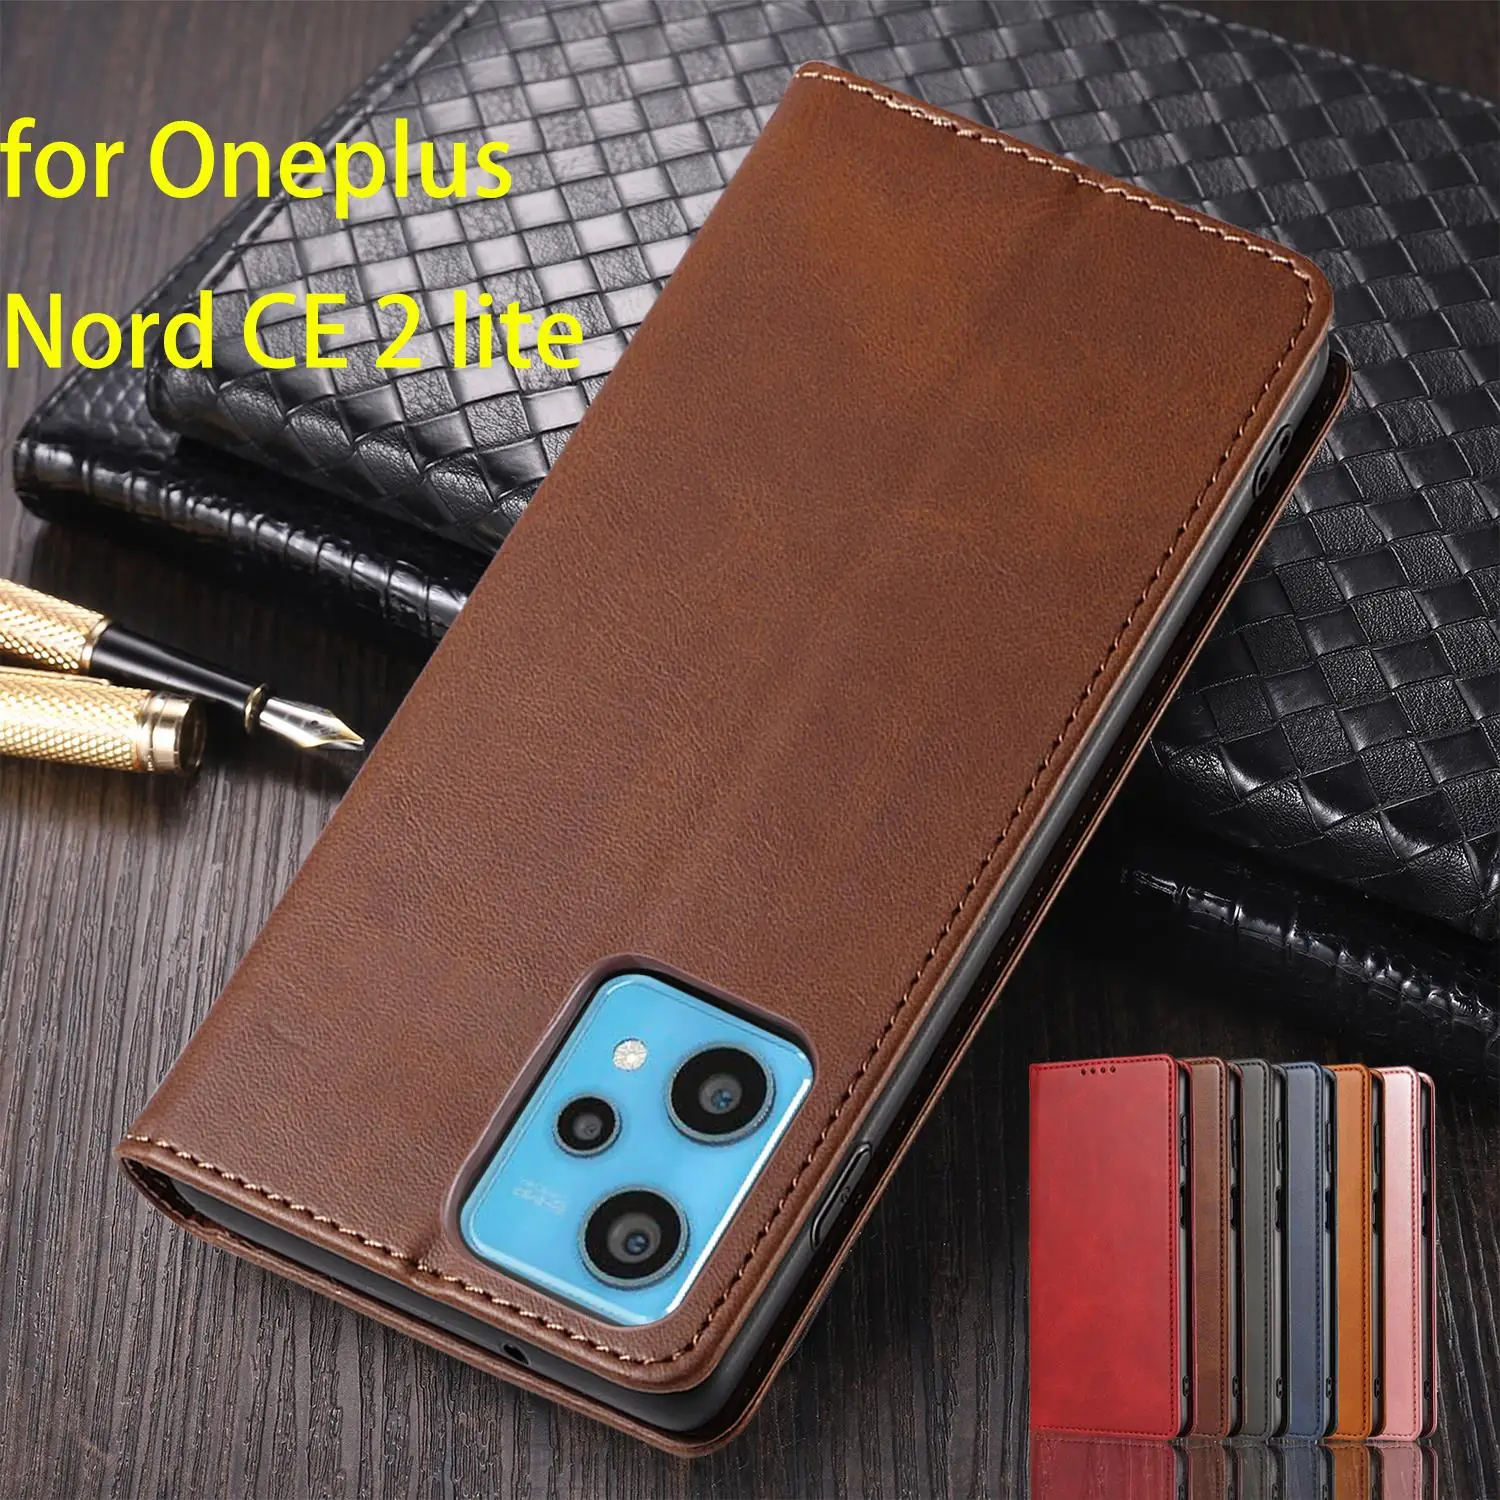 

Magnetic Attraction Cover Leather Case for Oneplus Nord CE 2 lite 5G Flip Case Card Holder Holster Wallet Case Fundas Coque